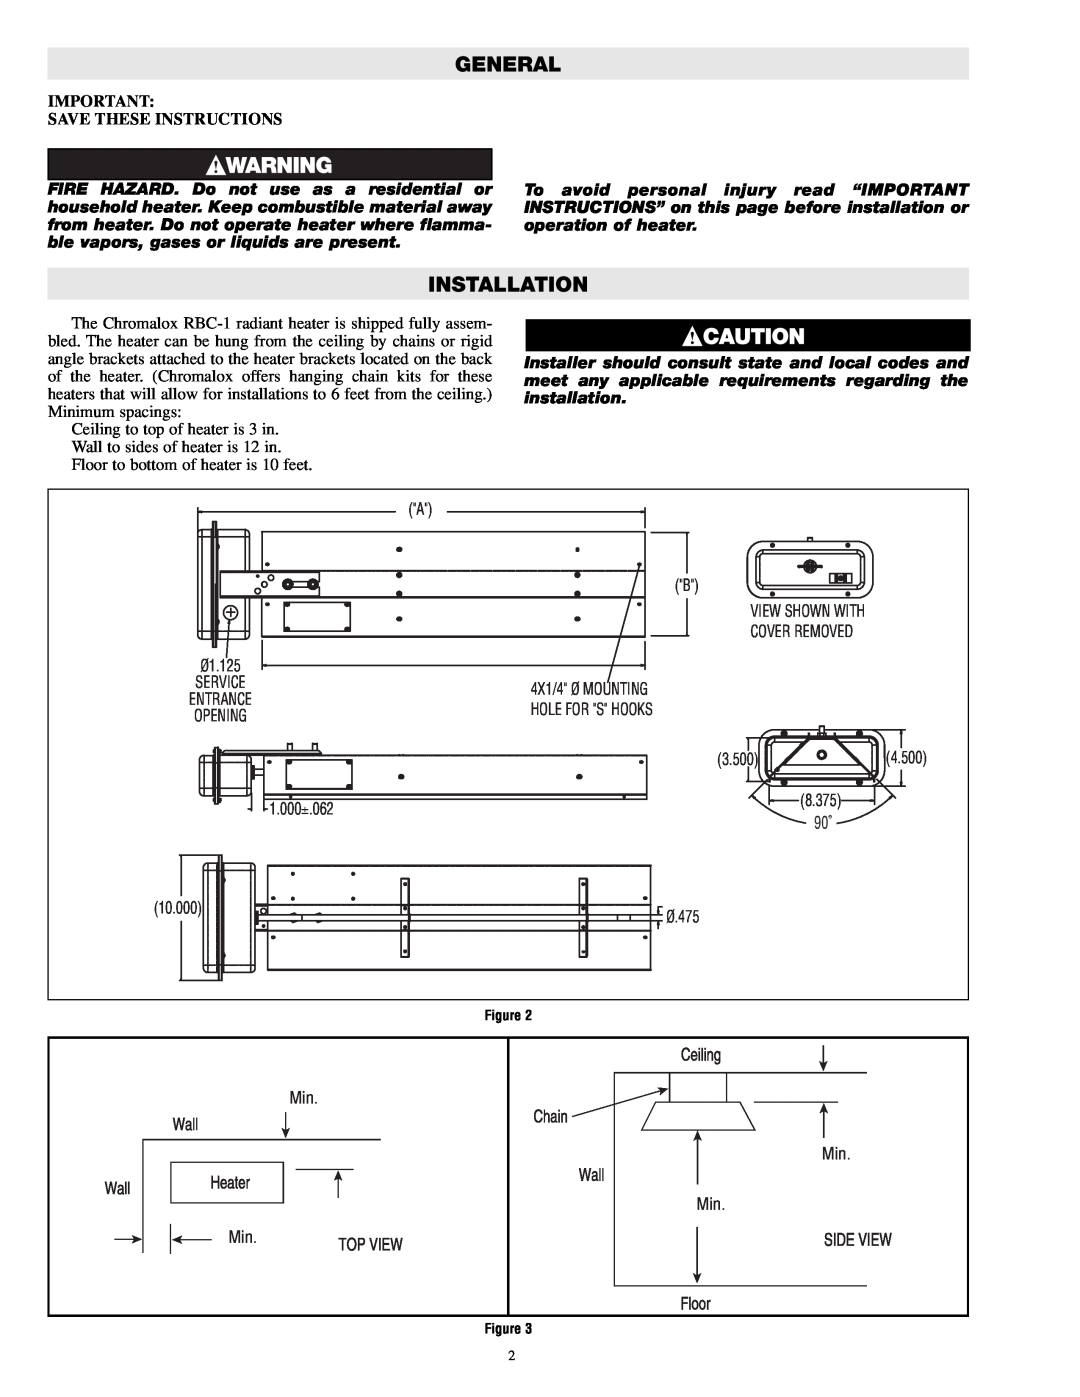 Chromalox PG442 specifications General, Installation, Save These Instructions 